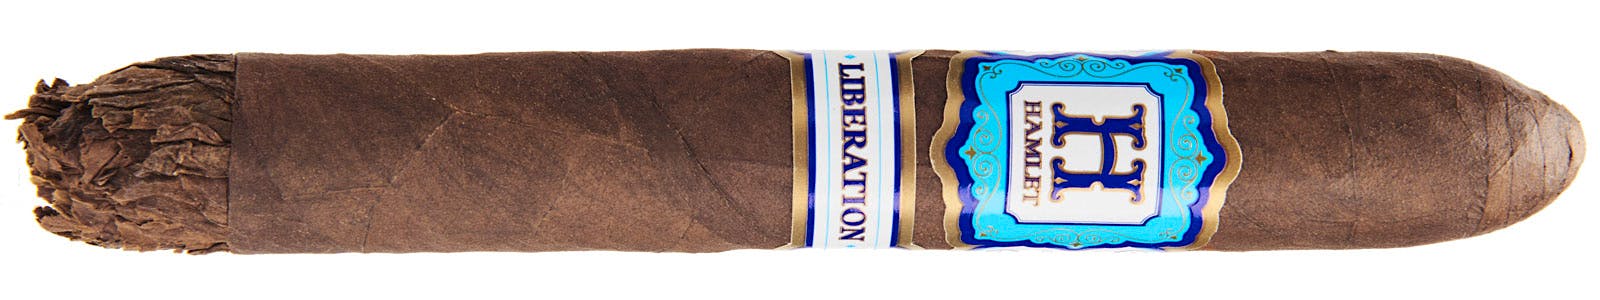 Hamlet Paredes's third cigar with Rocky Patel features a pronounced shaggy foot.